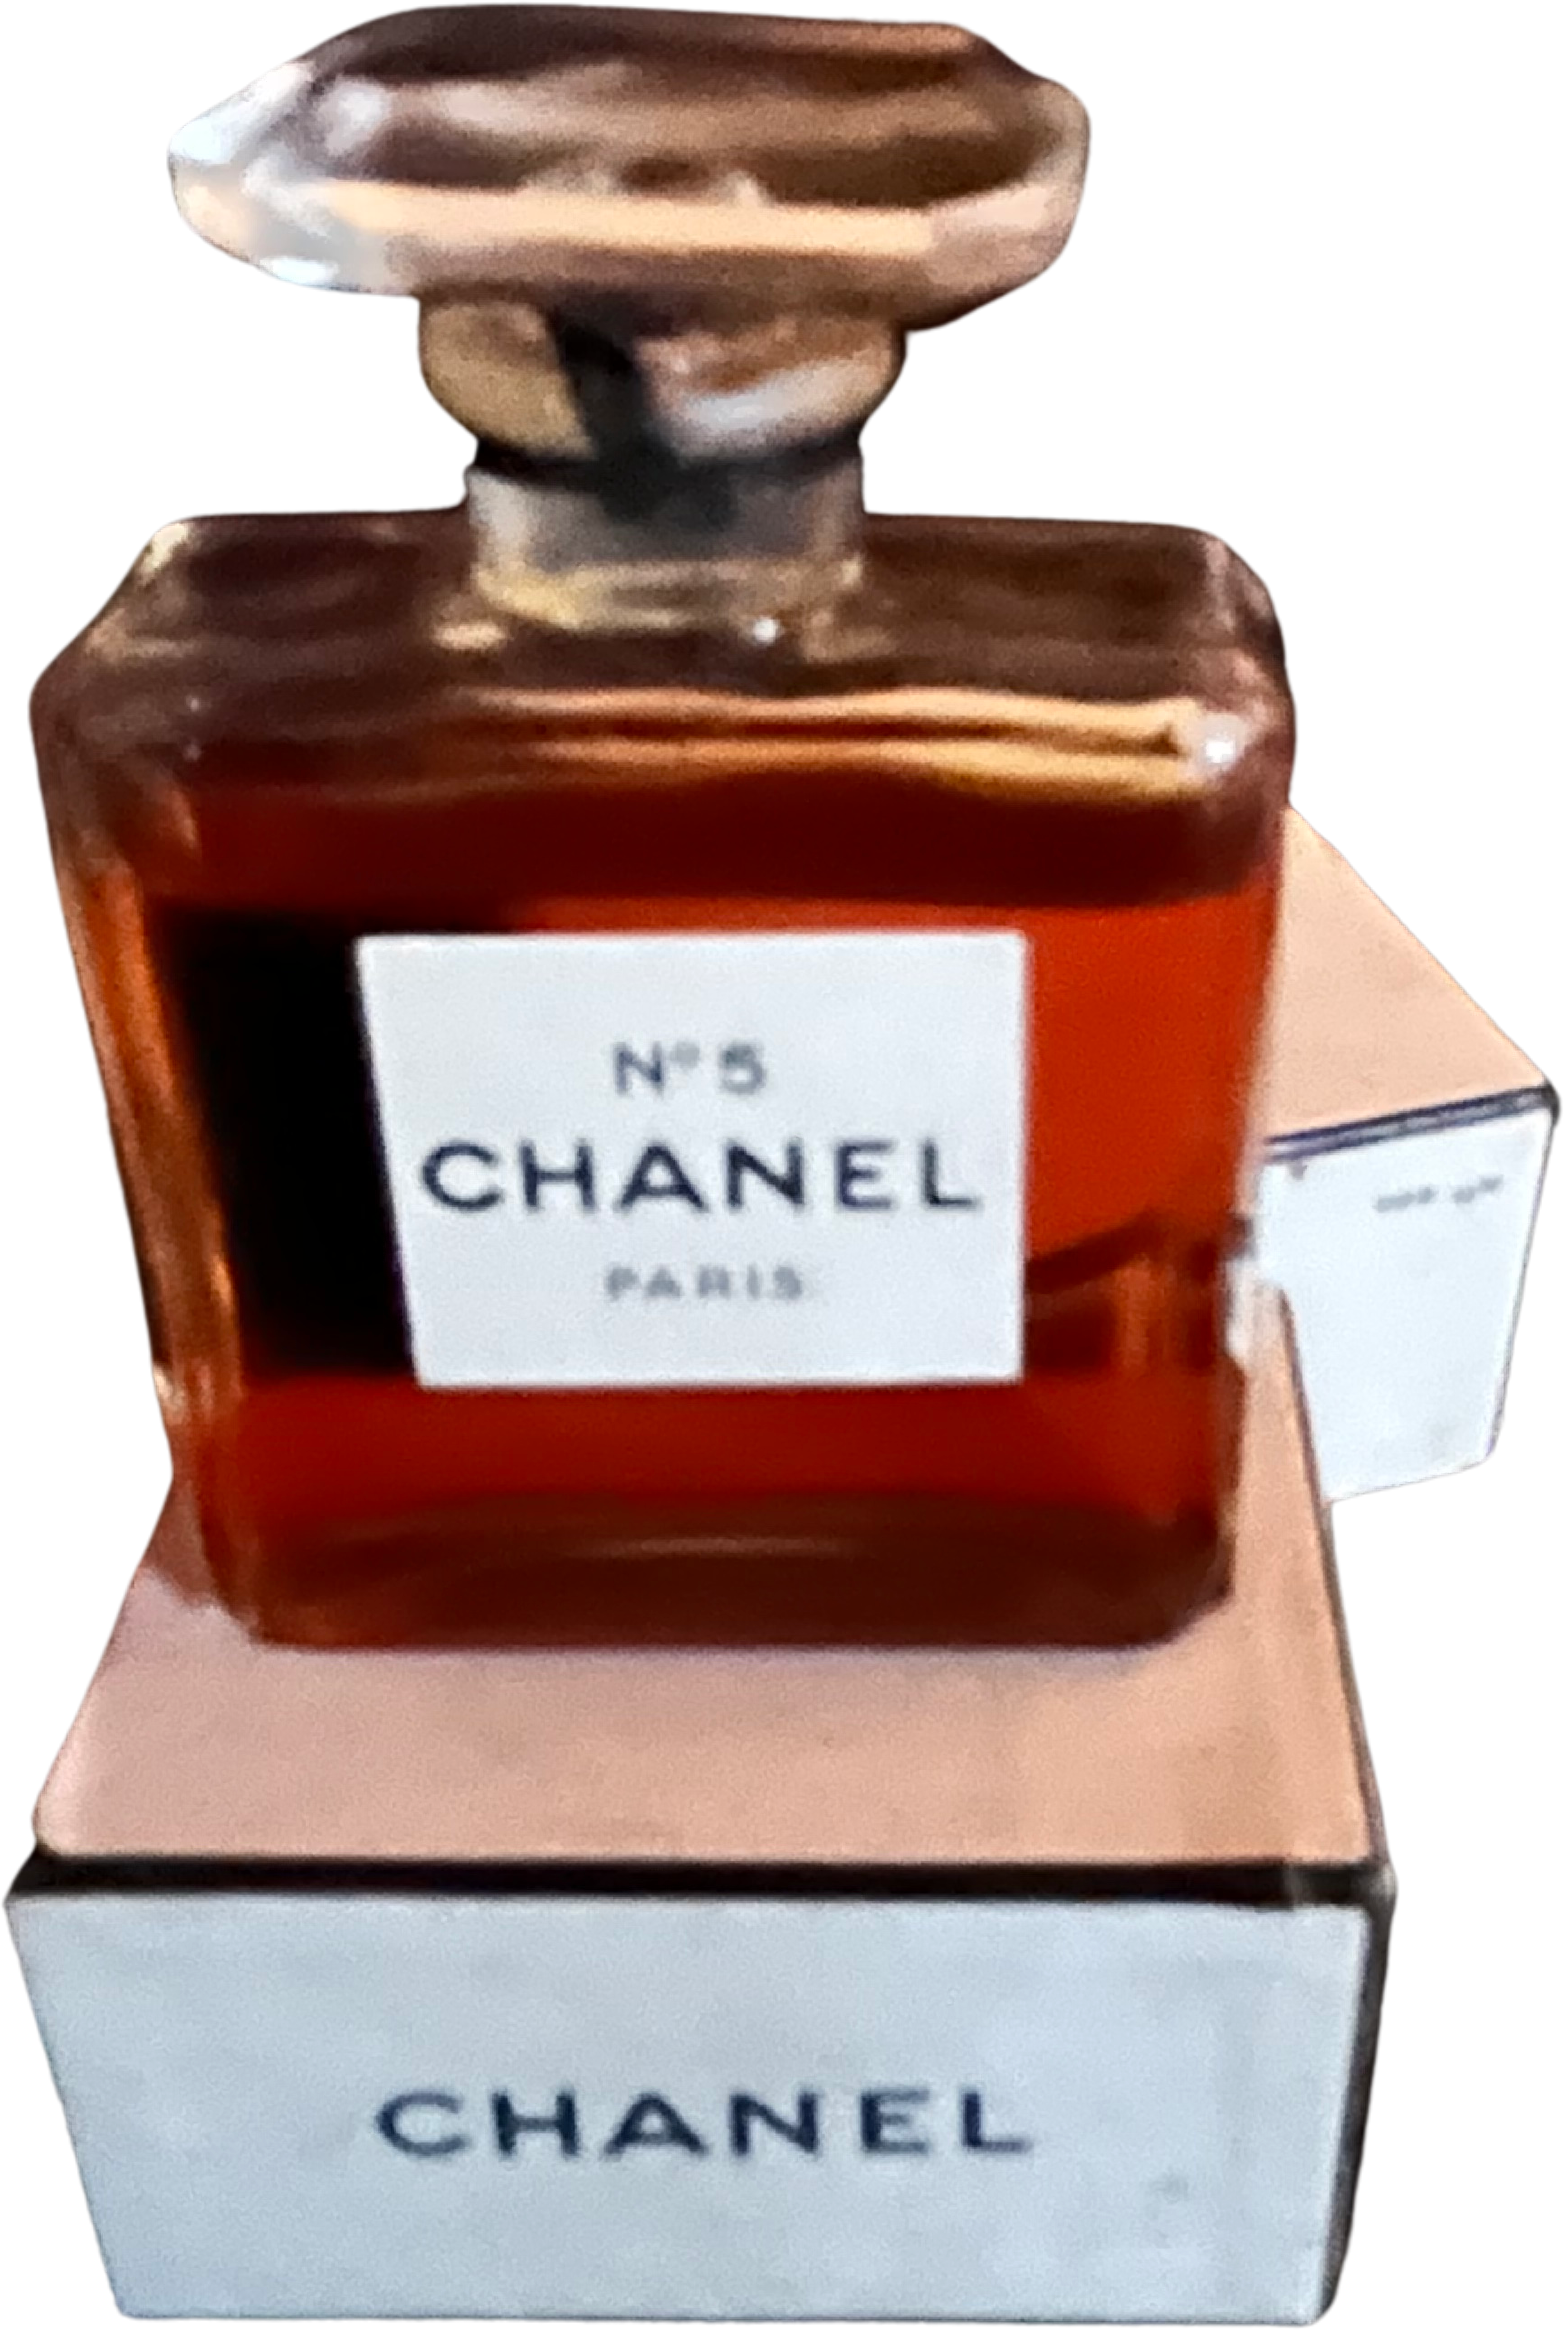 Vintage CHANEL No 5 PERFUME 1/3 Oz. & 2 1/4” Tall Bottle and Box